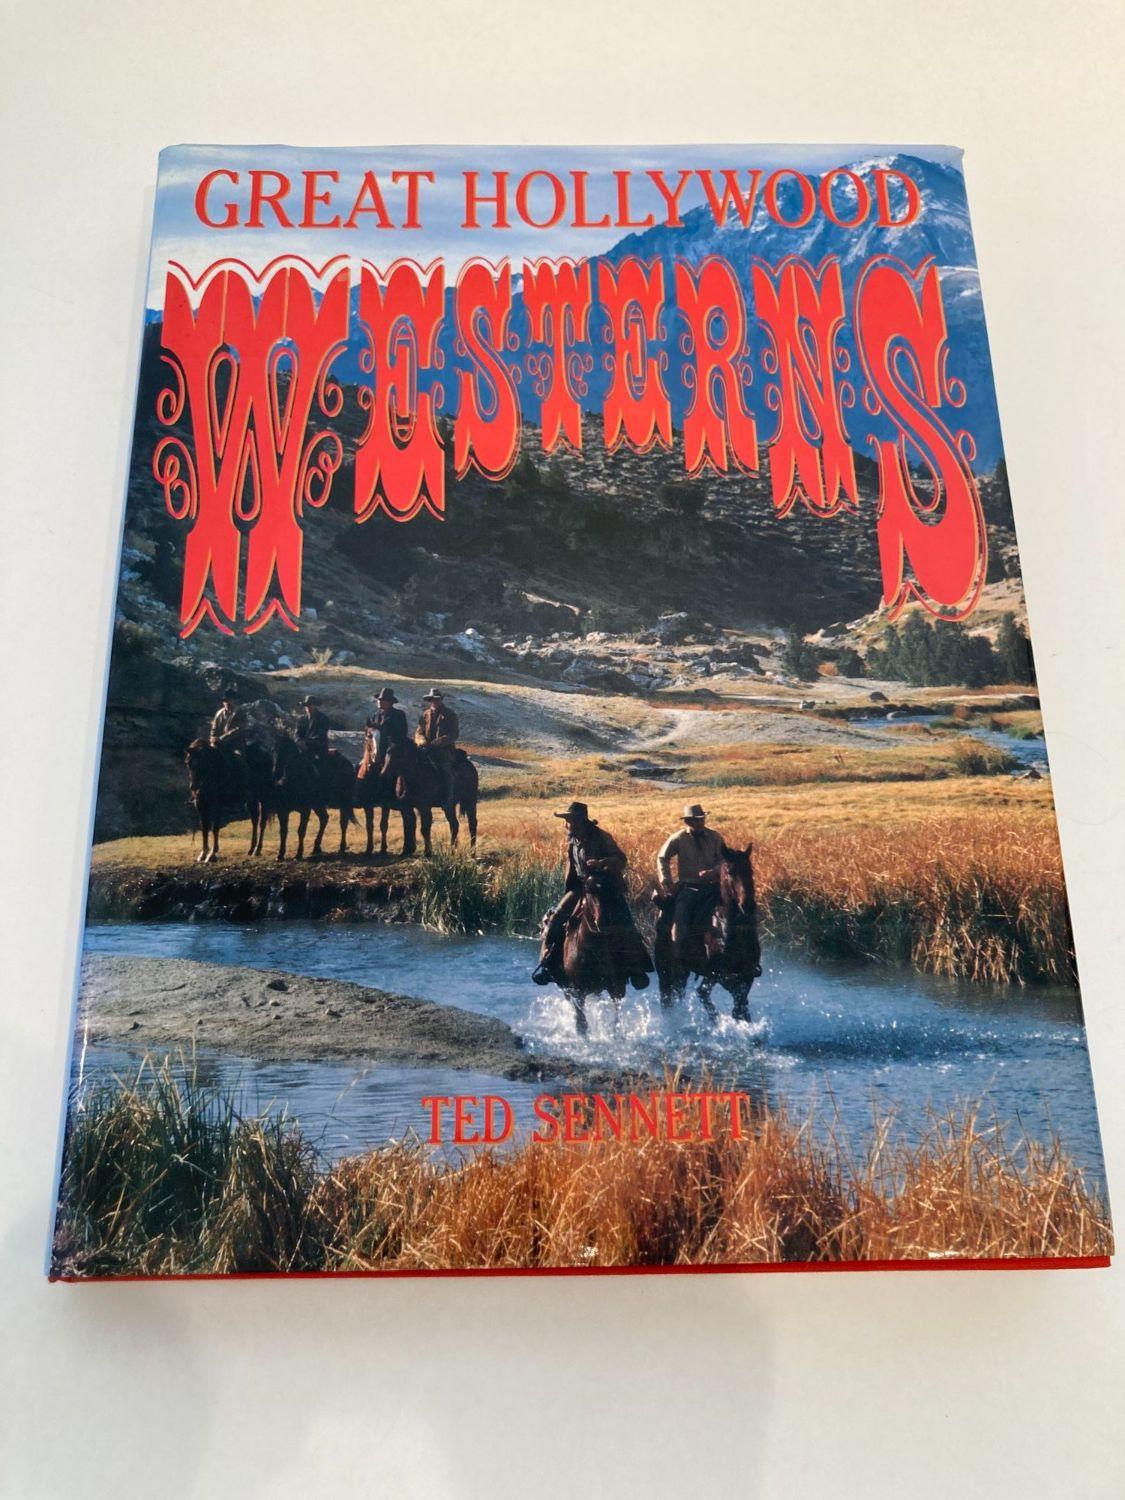 Great Hollywood Westerns Hardcover Book by Ted Sennett.
Great Hollywood Westerns by Ted Sennett Abrams, 1990 - Motion pictures - 272 pages.
This volume offers all the timeless images and icons of the movie West, from wagon trains snaking across